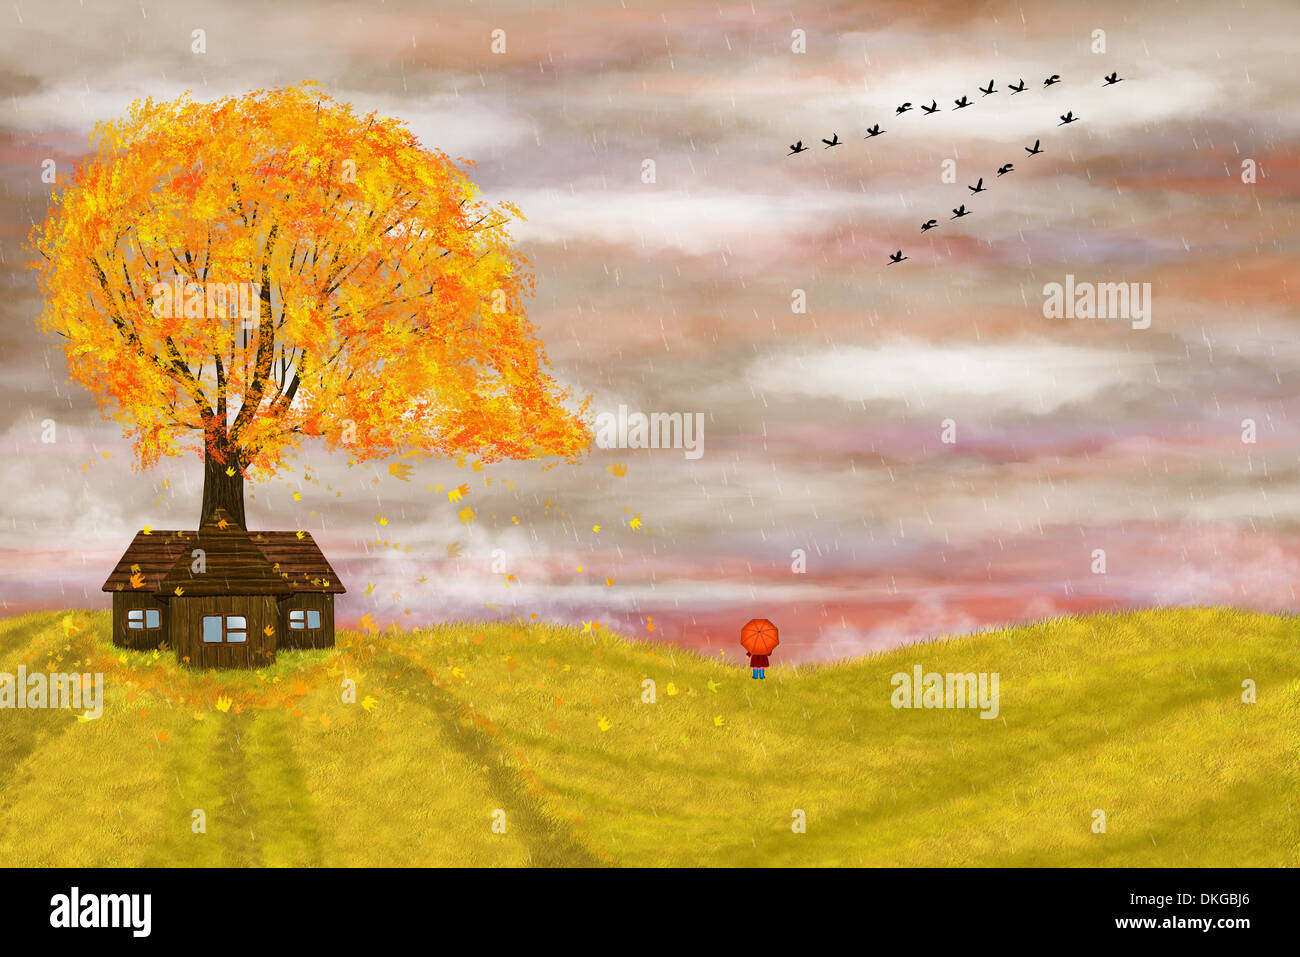 Autumn illustration with a little girl with an umbrella. Yellow tree and a lone house in the rain. Stock Photo